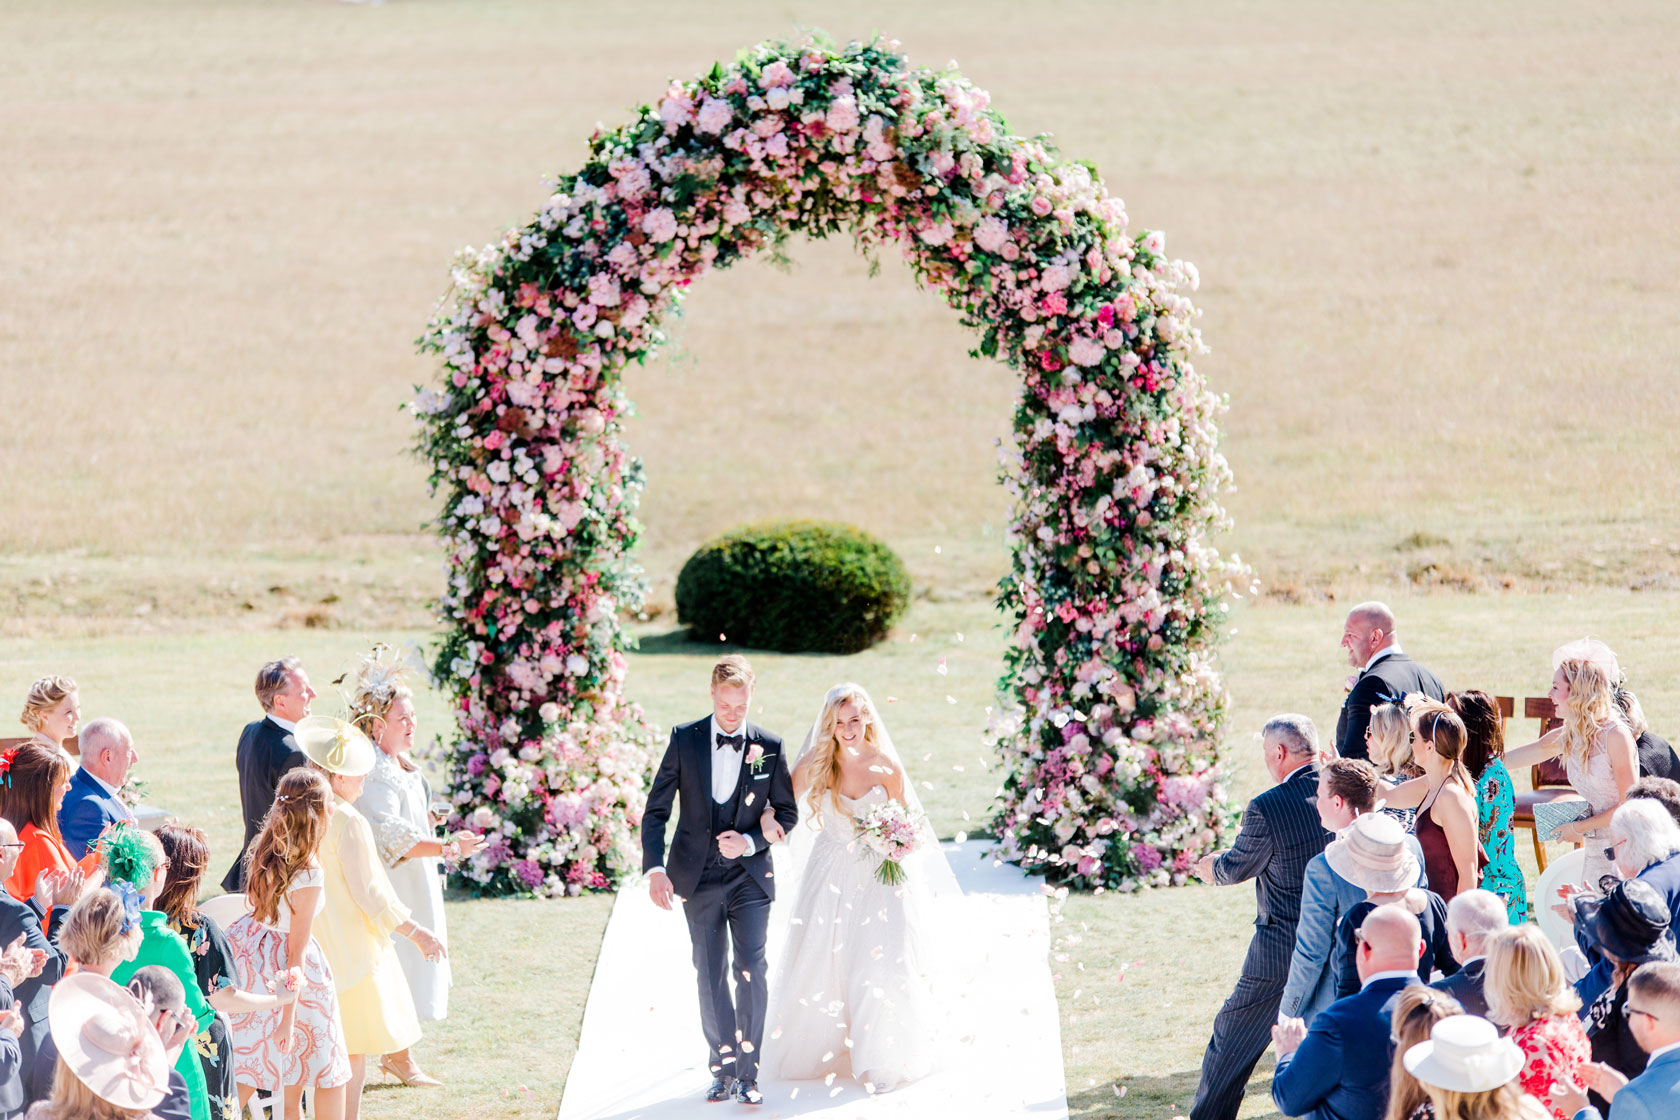 Bride and Groom walking down the aisle outdoors with a beautiful flower arch behind them